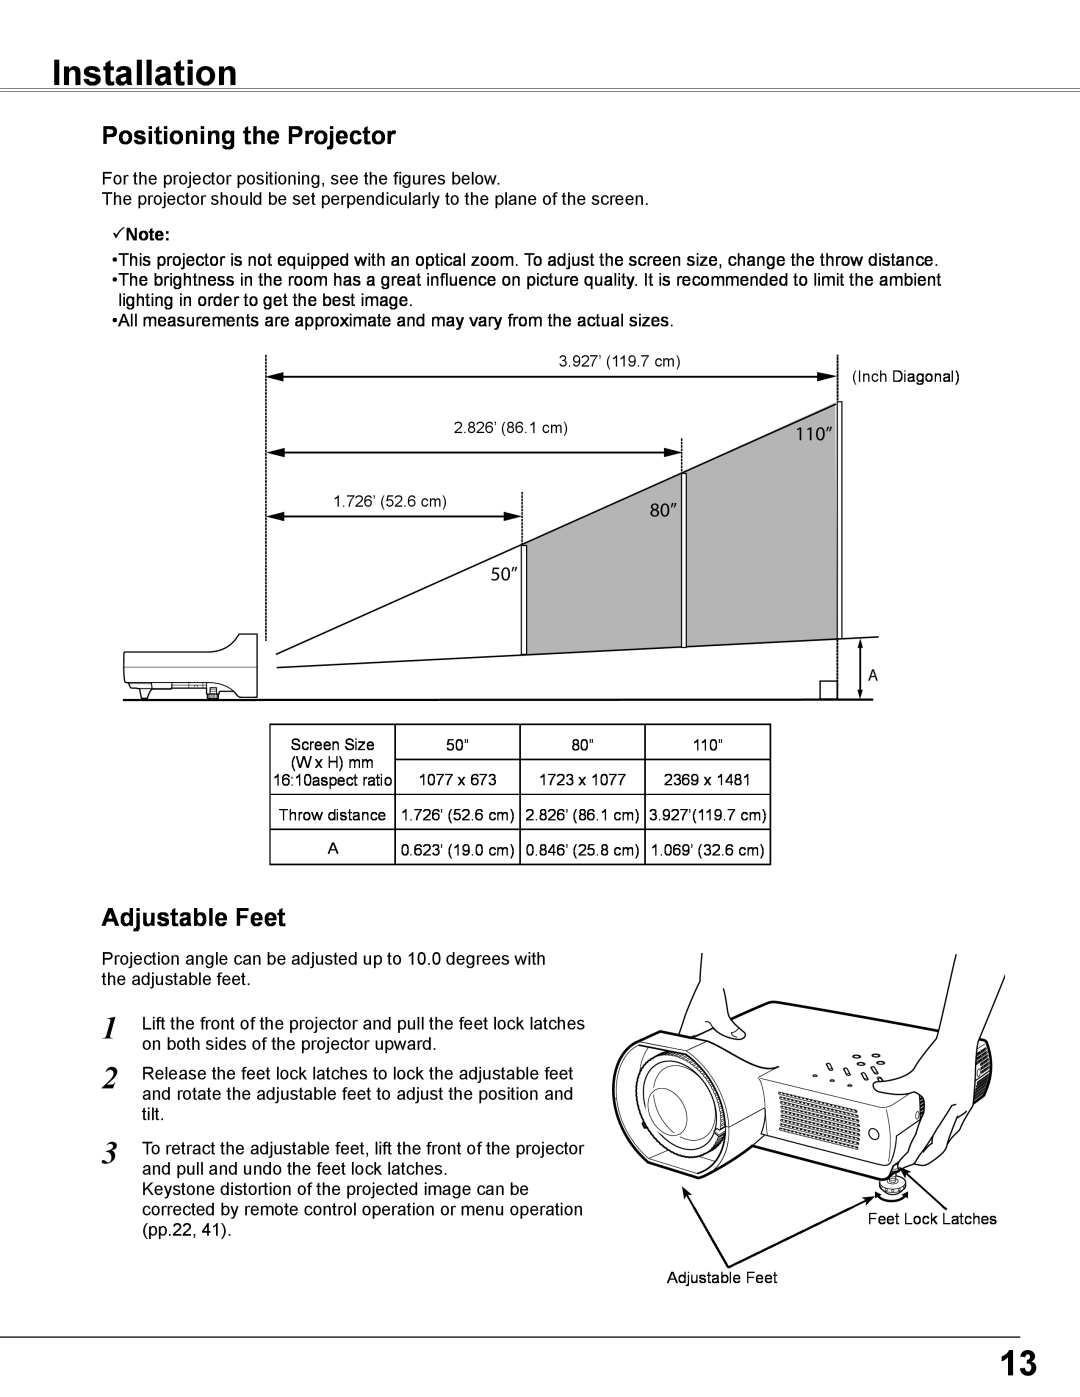 Sanyo PLC-WXE46 owner manual Installation, Positioning the Projector, Adjustable Feet, Note 